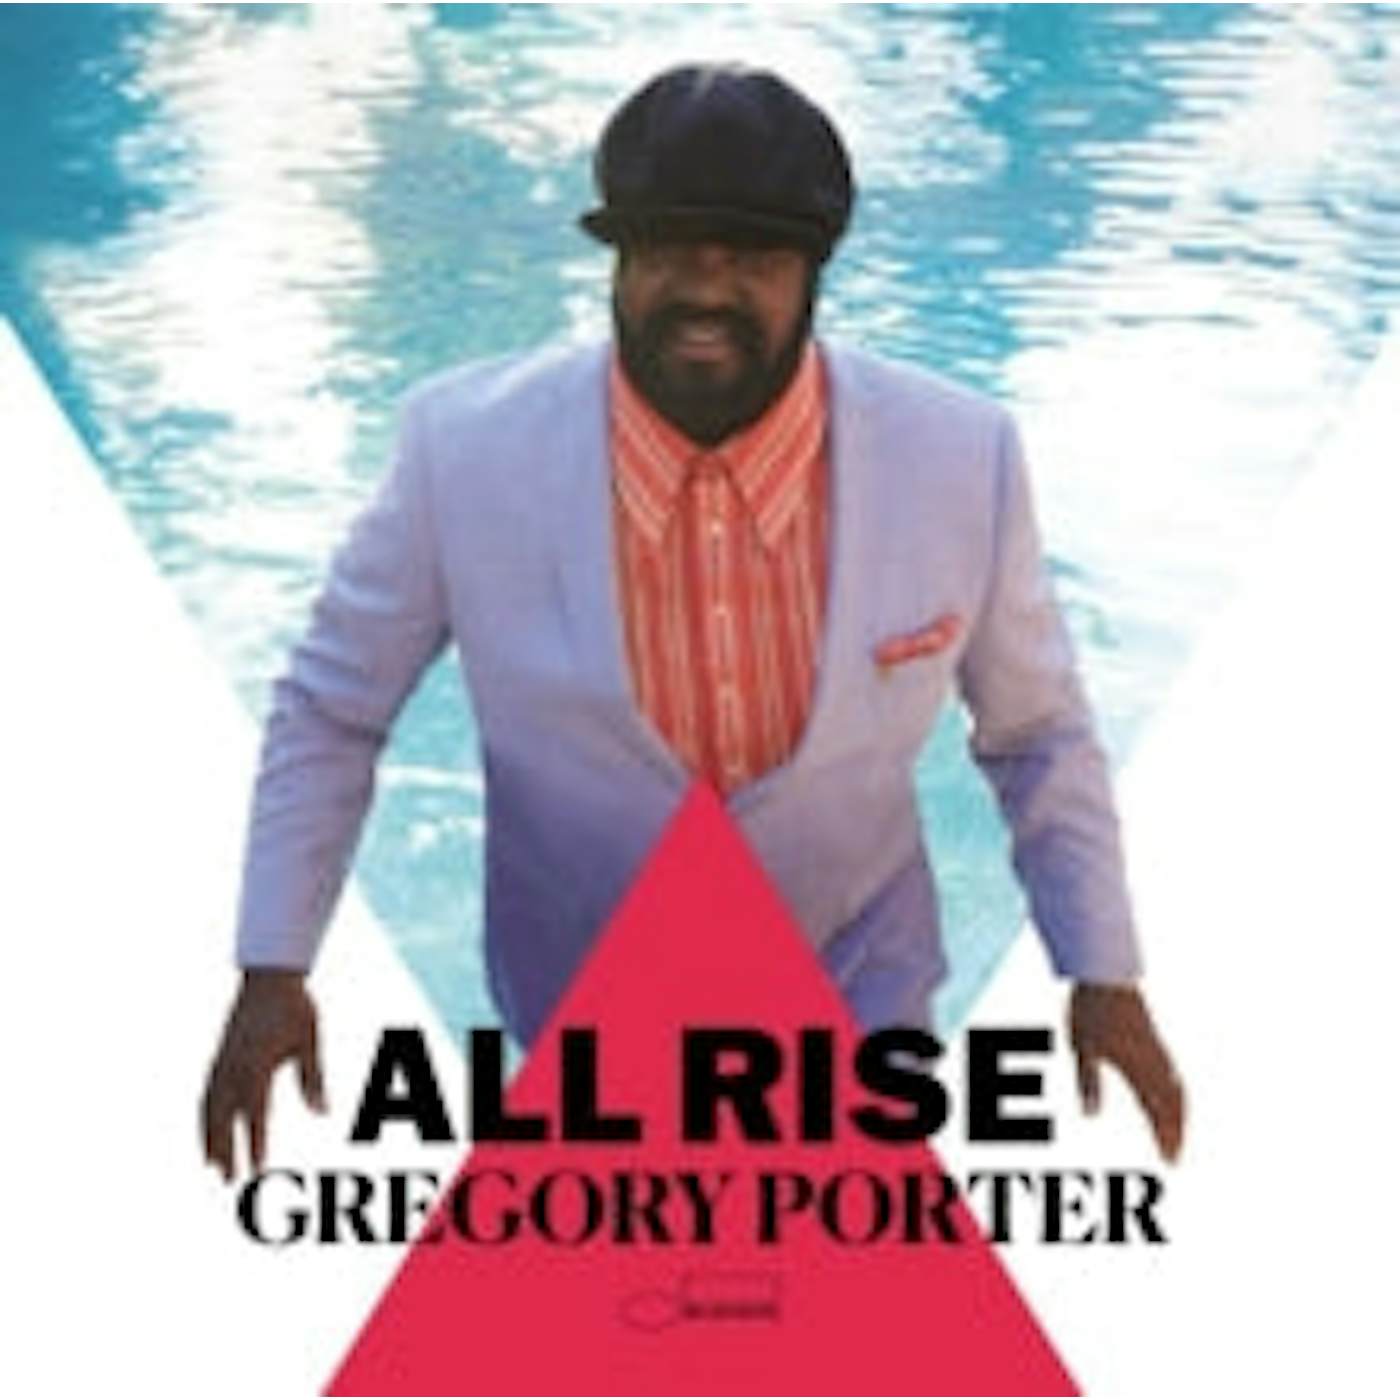 Gregory Porter CD - All Rise (Deluxe Edition)